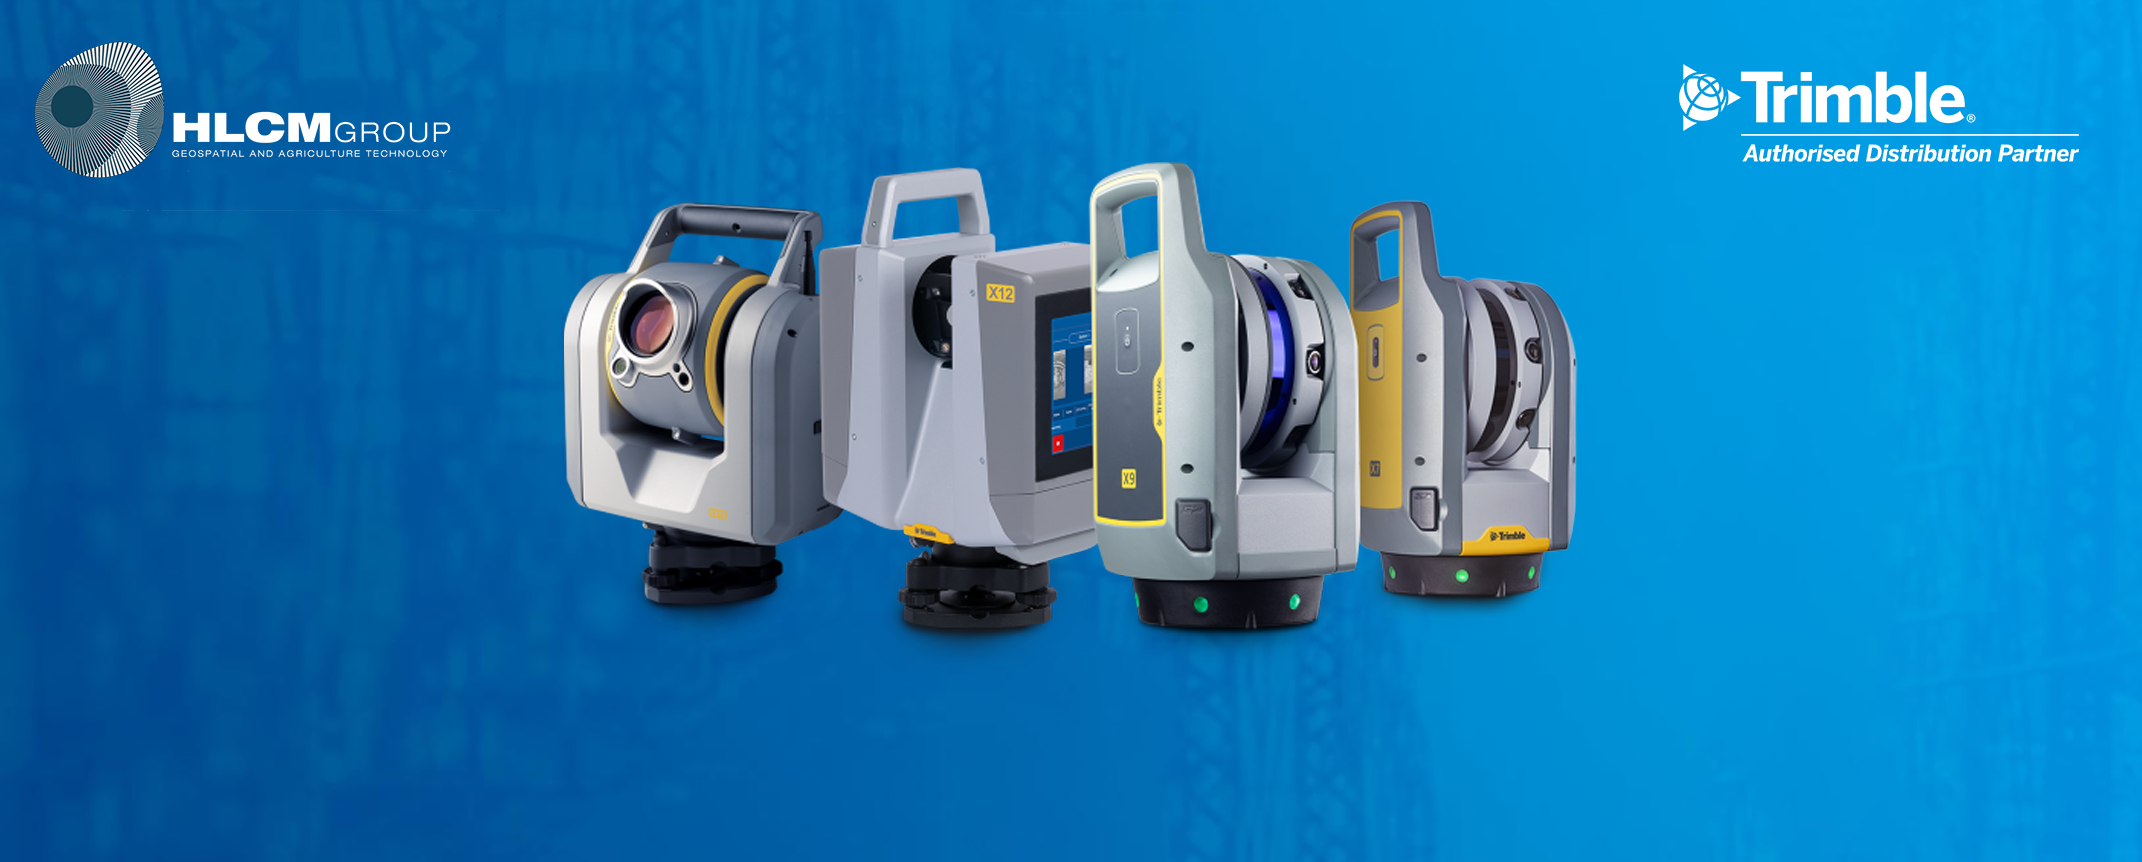 Trimble Laser Scanners Products Slide